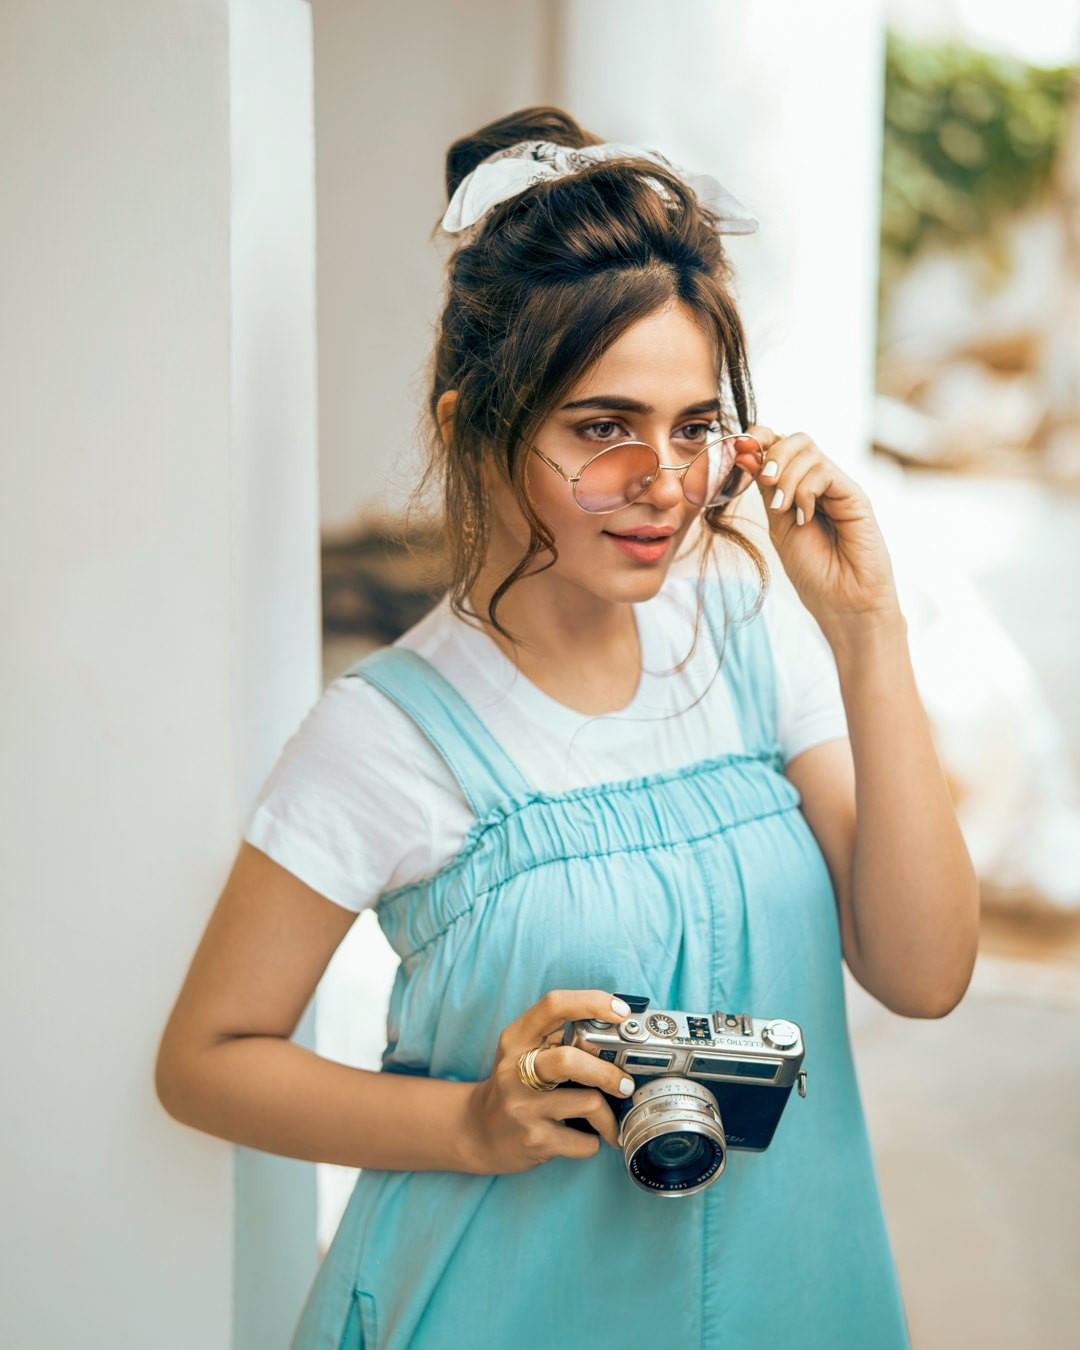 Sumbul Iqbal is Looking Gorgeous in her trendy look for Latest Photo shoot